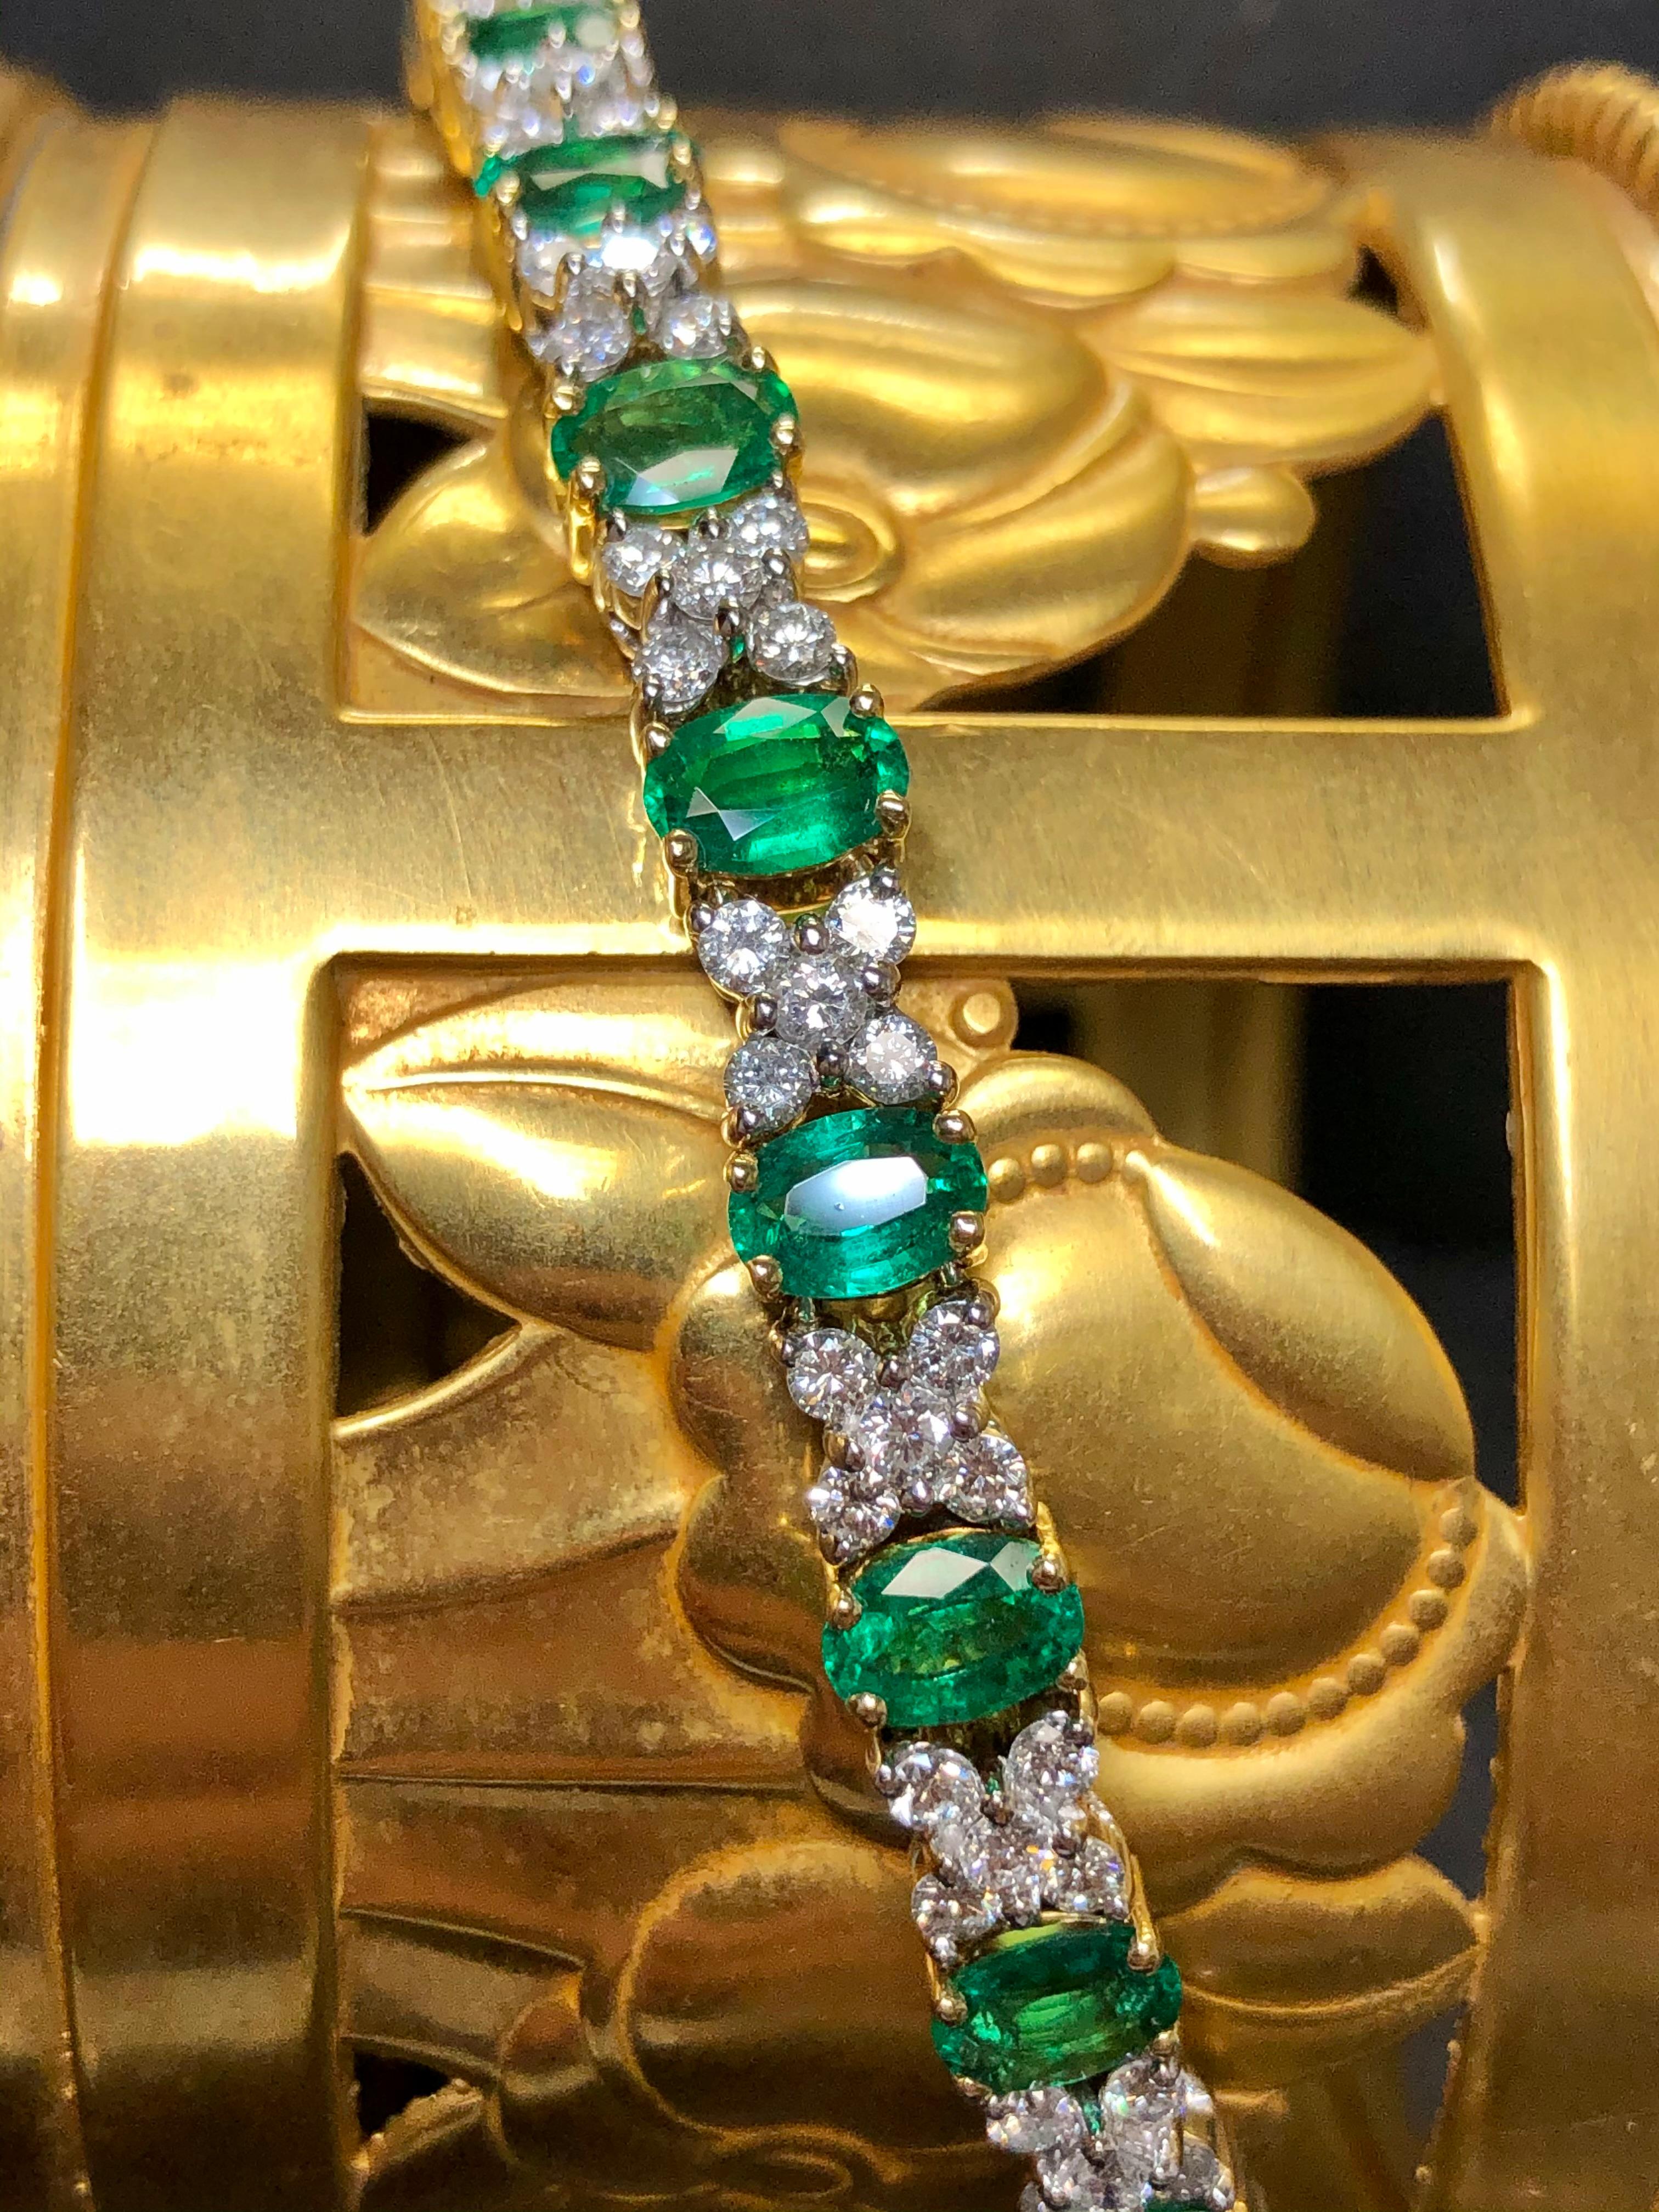 A spectacular bracelet hand crafted in 18K yellow and white gold set with the most incredible color natural oval cut emeralds with a total approximate weight of 8cttw. Separating each emerald are quad-set shared prong diamond sections containing